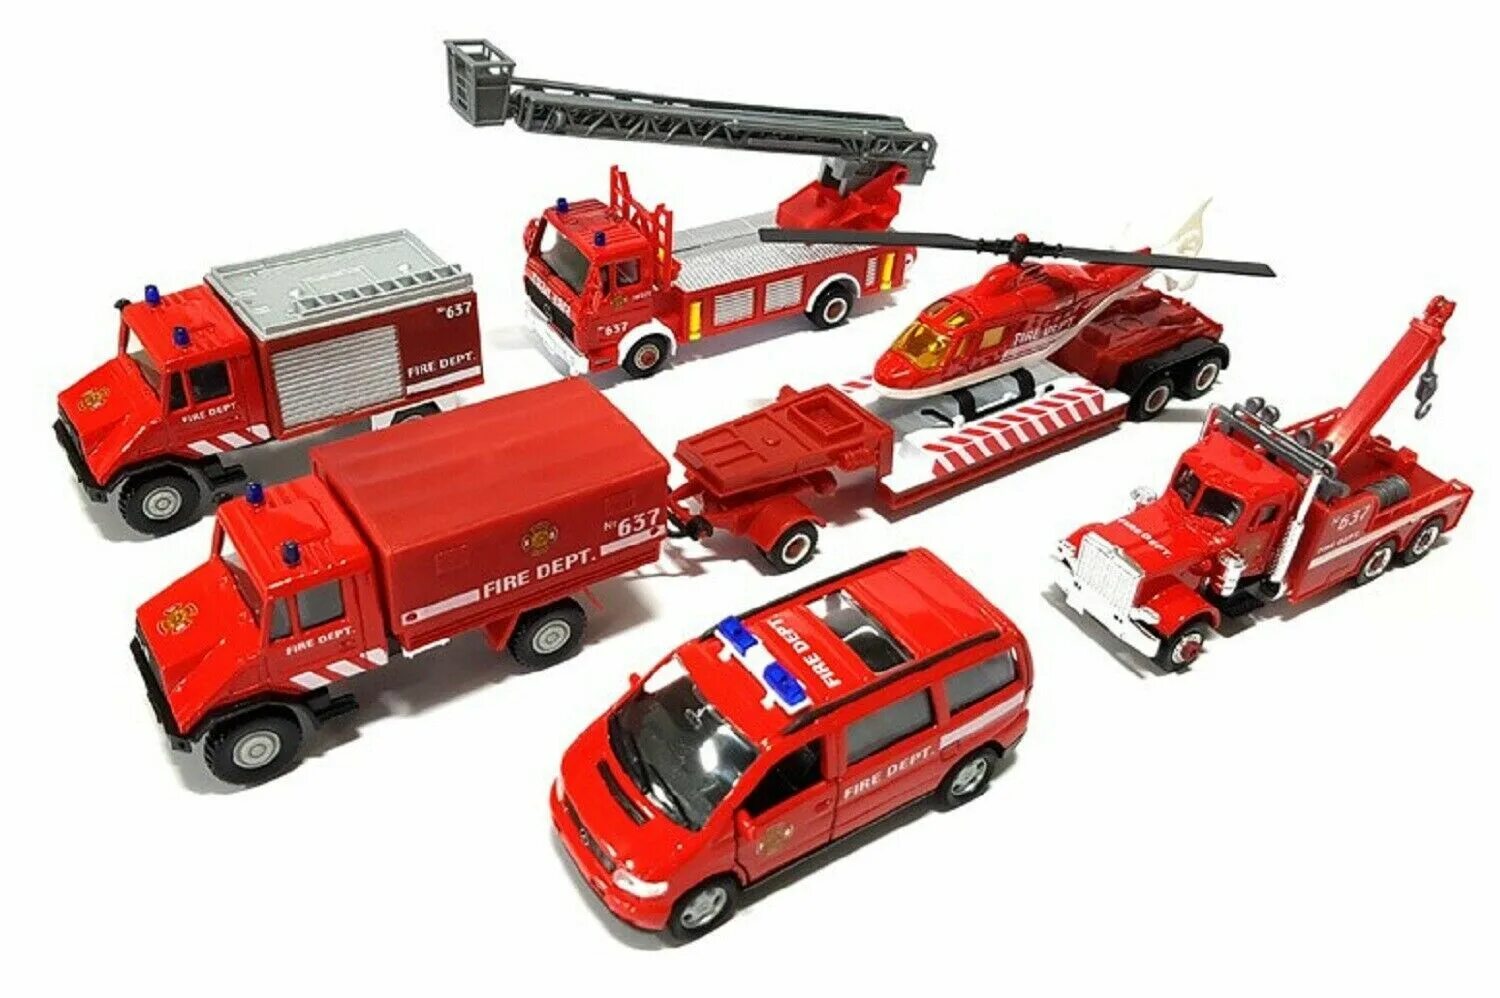 Rescued toys. Машинки Fire Rescue. Пожарная машинка Fire and Rescue. Green Toys Fire Dept игрушки. Noname игрушка машина пожарная. Fire Rescue/23 см б28592 Китай.